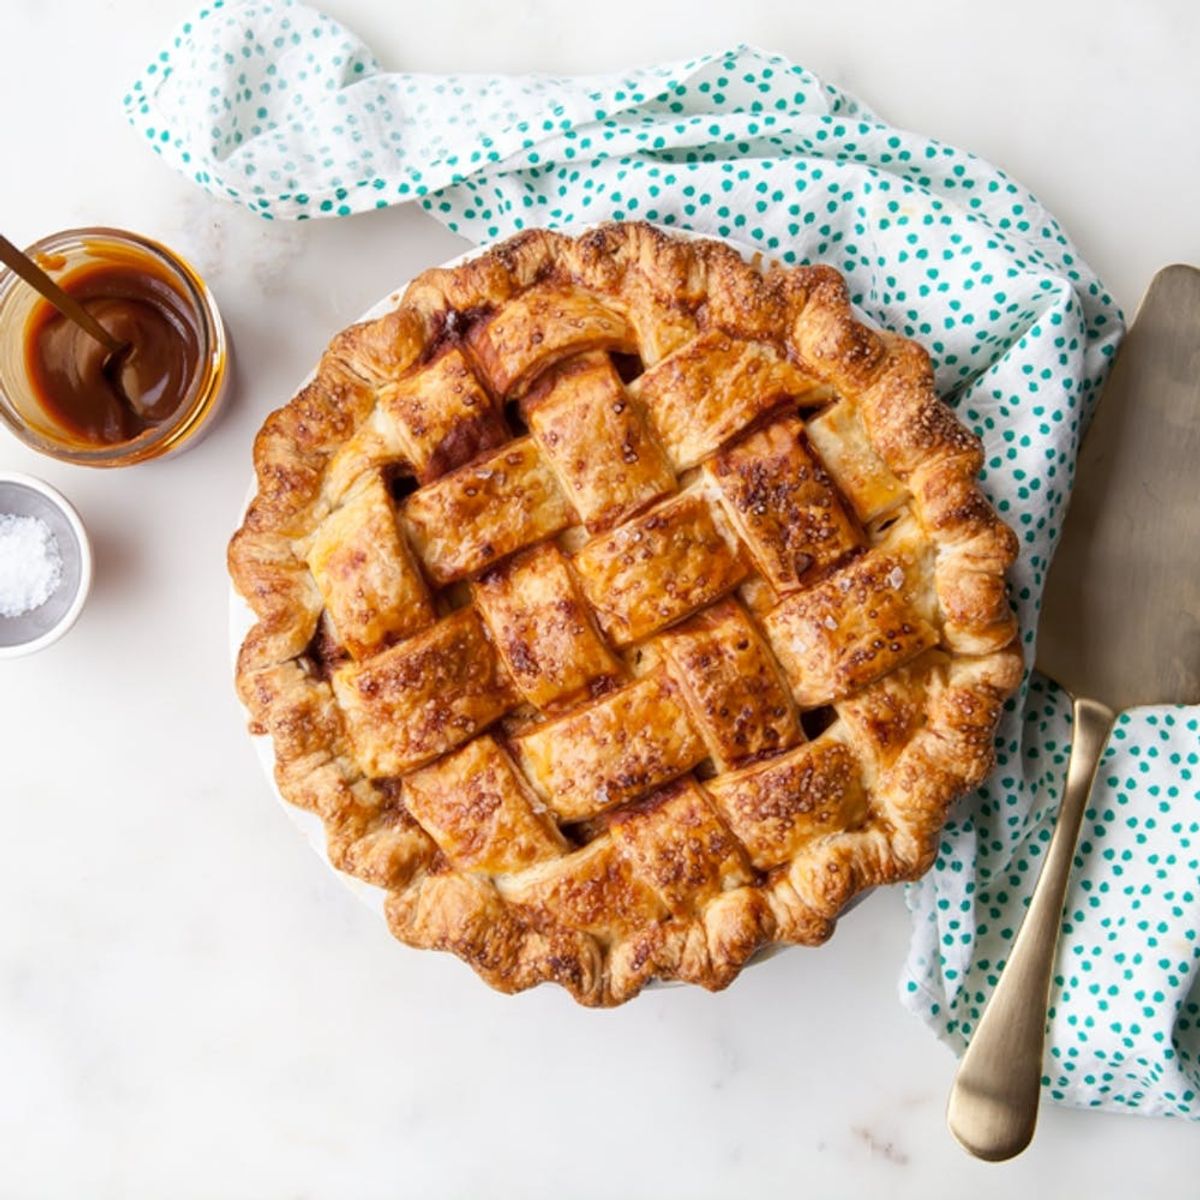 Salted Caramel Meets Apples in the Best Pie You’ll Make All Season